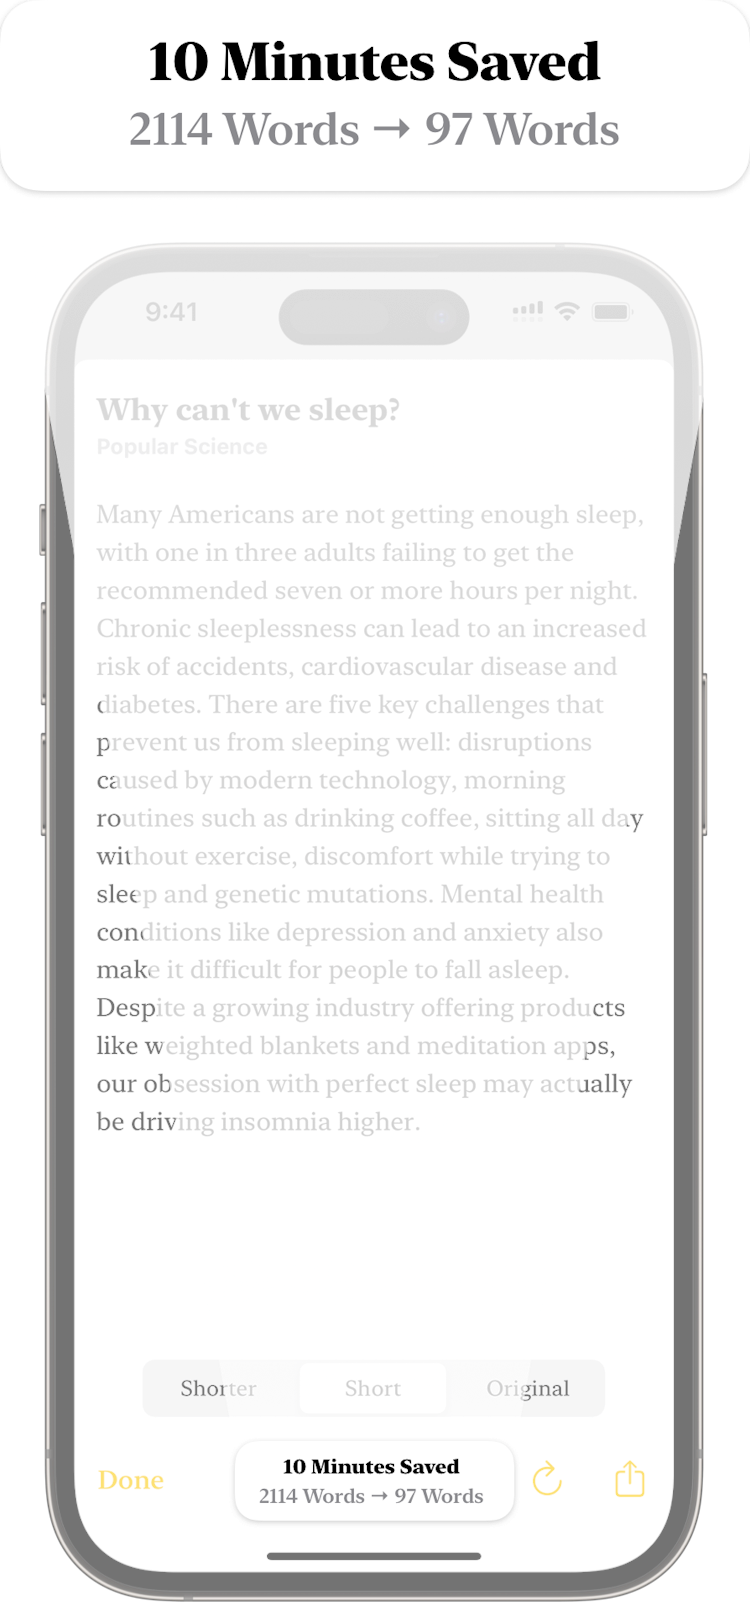 Image showing 2000 words being funneled into the Shortify icon and 97 words coming out. The article is about lack of sleep.